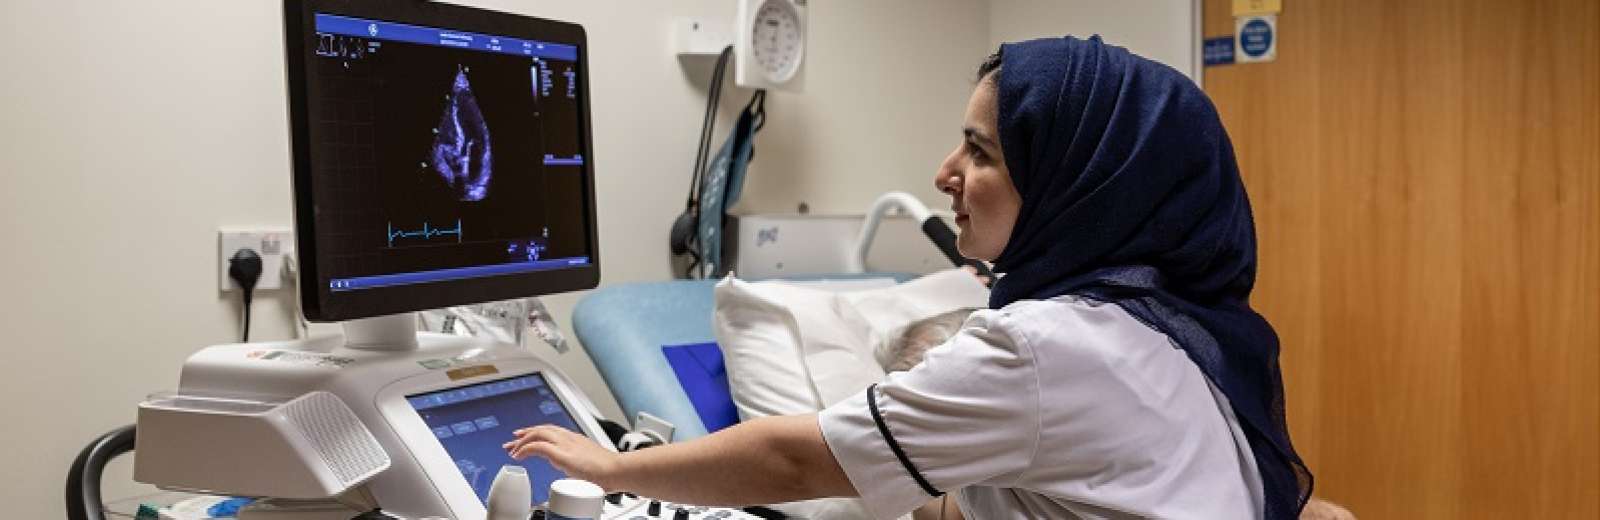 The University of Leeds PG Cert Echocardiography is a theory based programme which teaches students the science and technology of ultrasound, fundamentals of Echocardiography and pathologies.